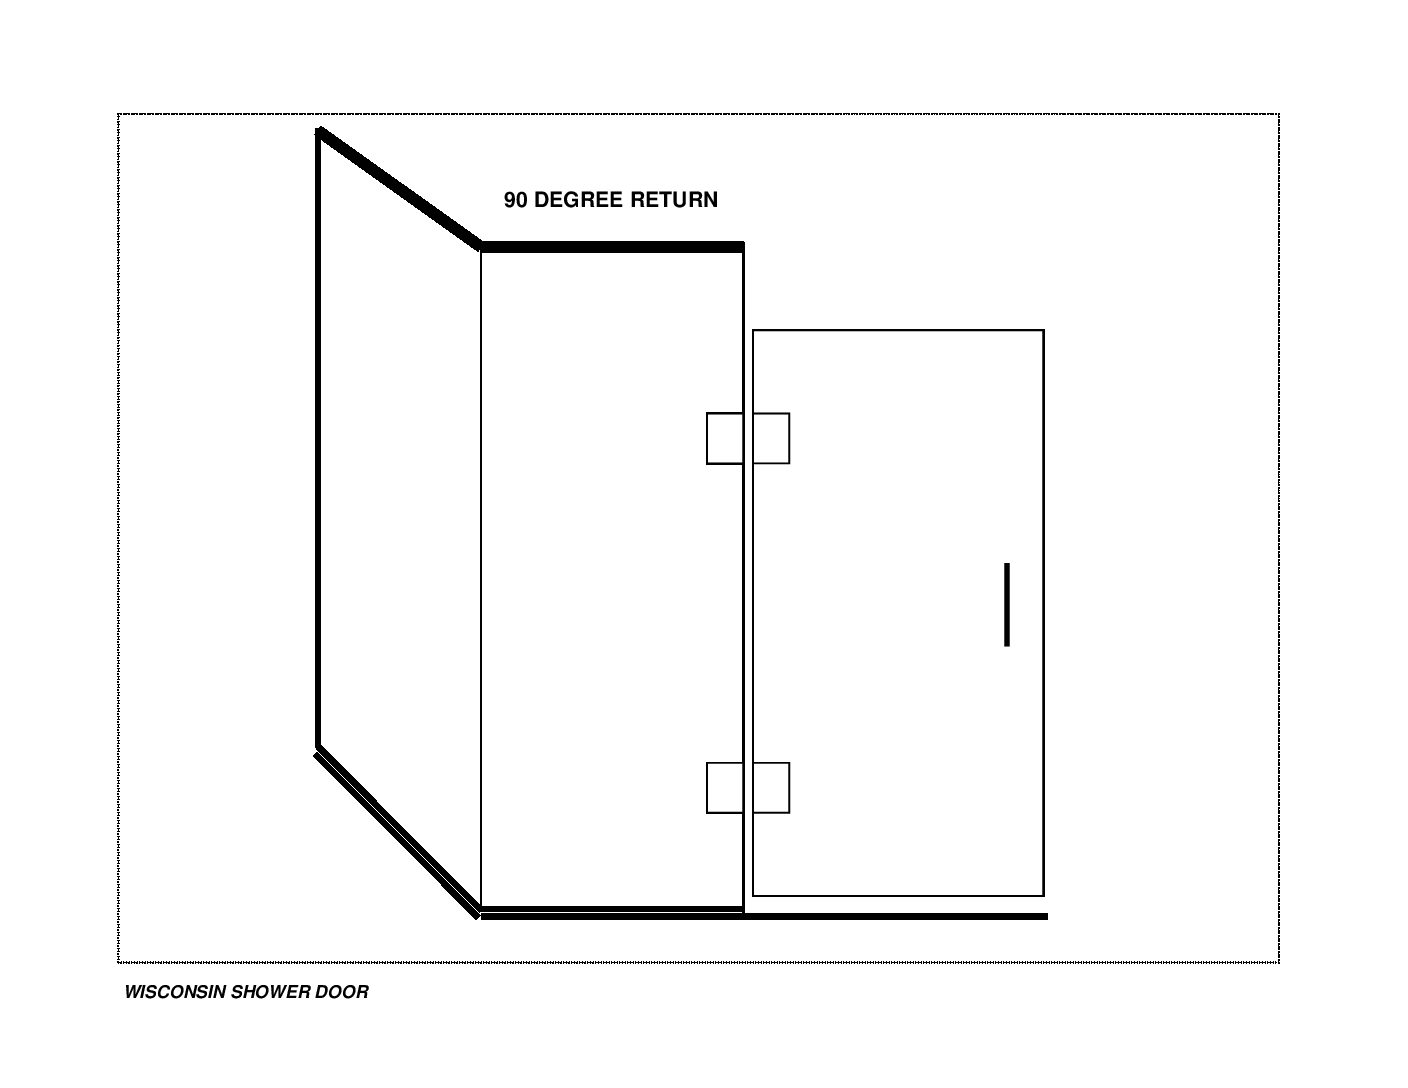 Shower door enclosure Return-to-Ceiling, Panel-to-Ceiling and Door (HL) w/Curb